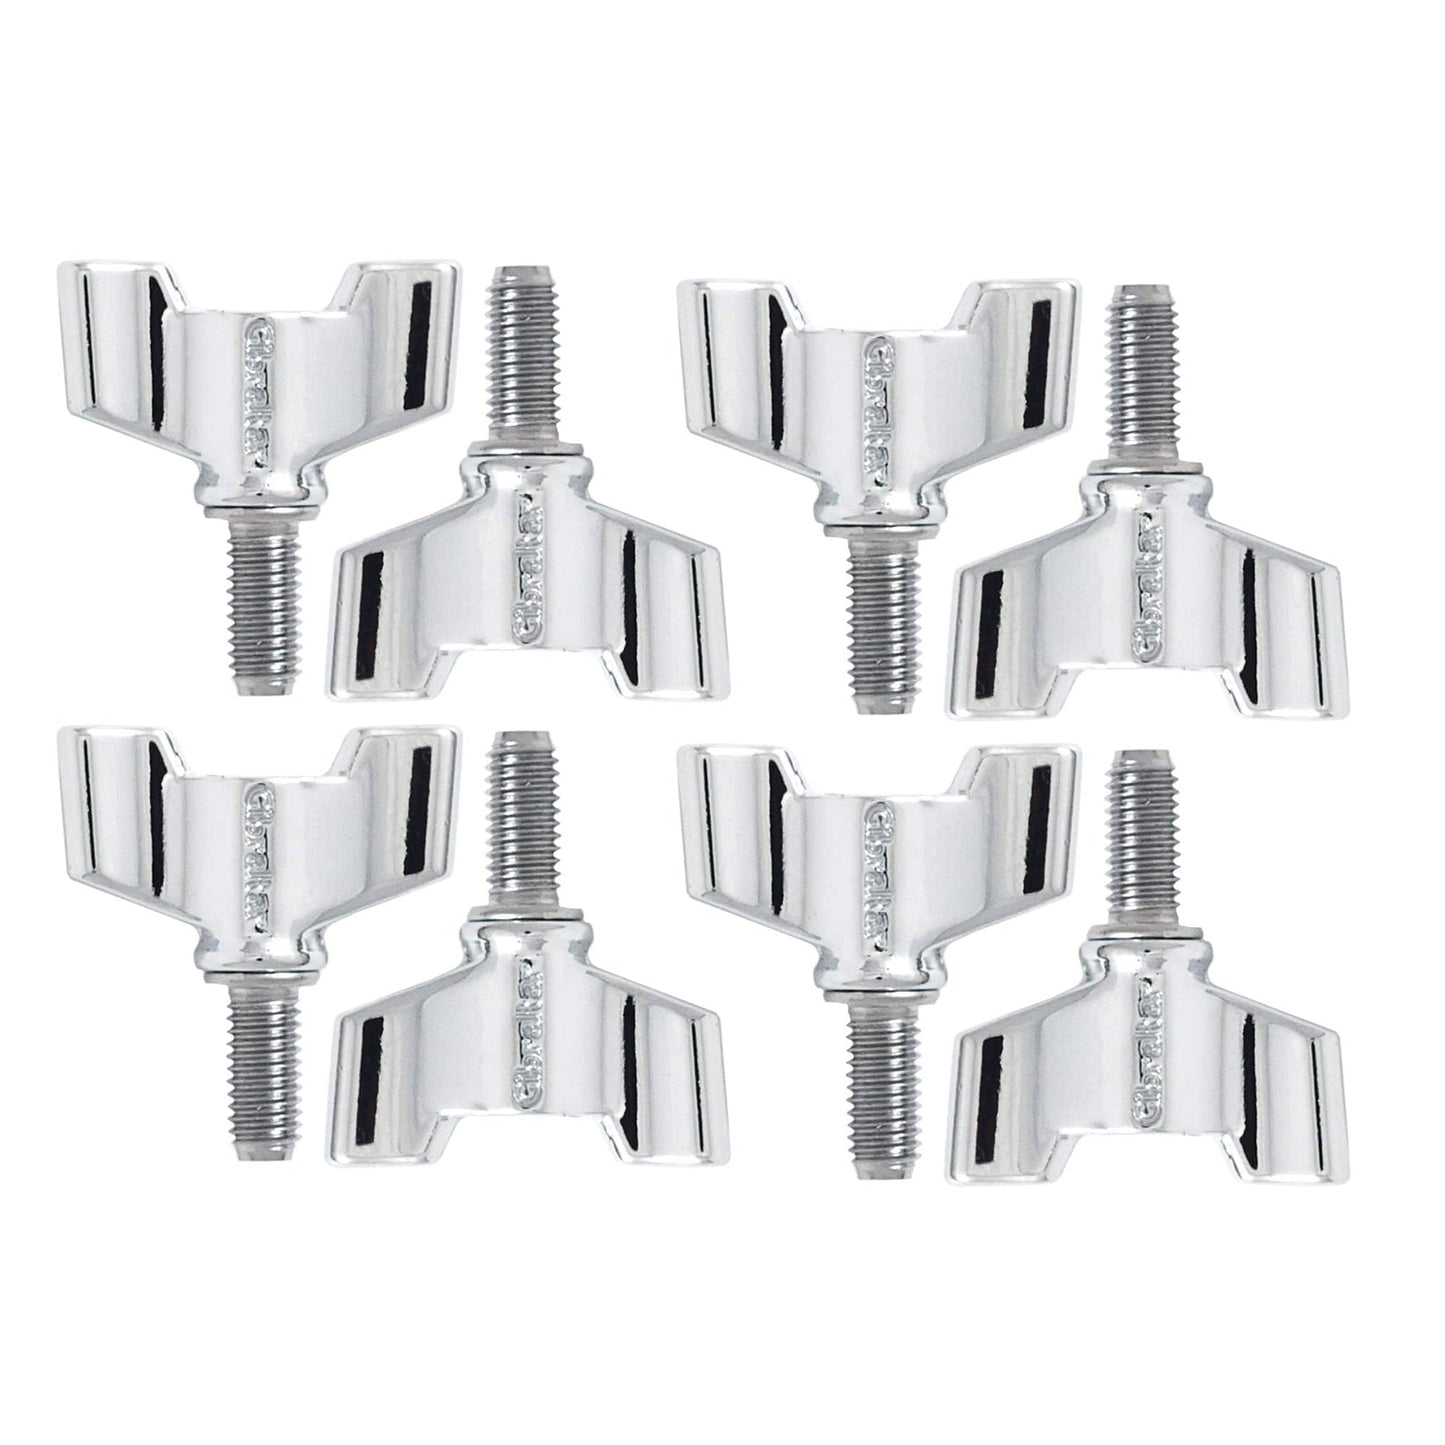 Gibraltar 8mm Wing Screw (8 Pack Bundle) Drums and Percussion / Parts and Accessories / Drum Parts